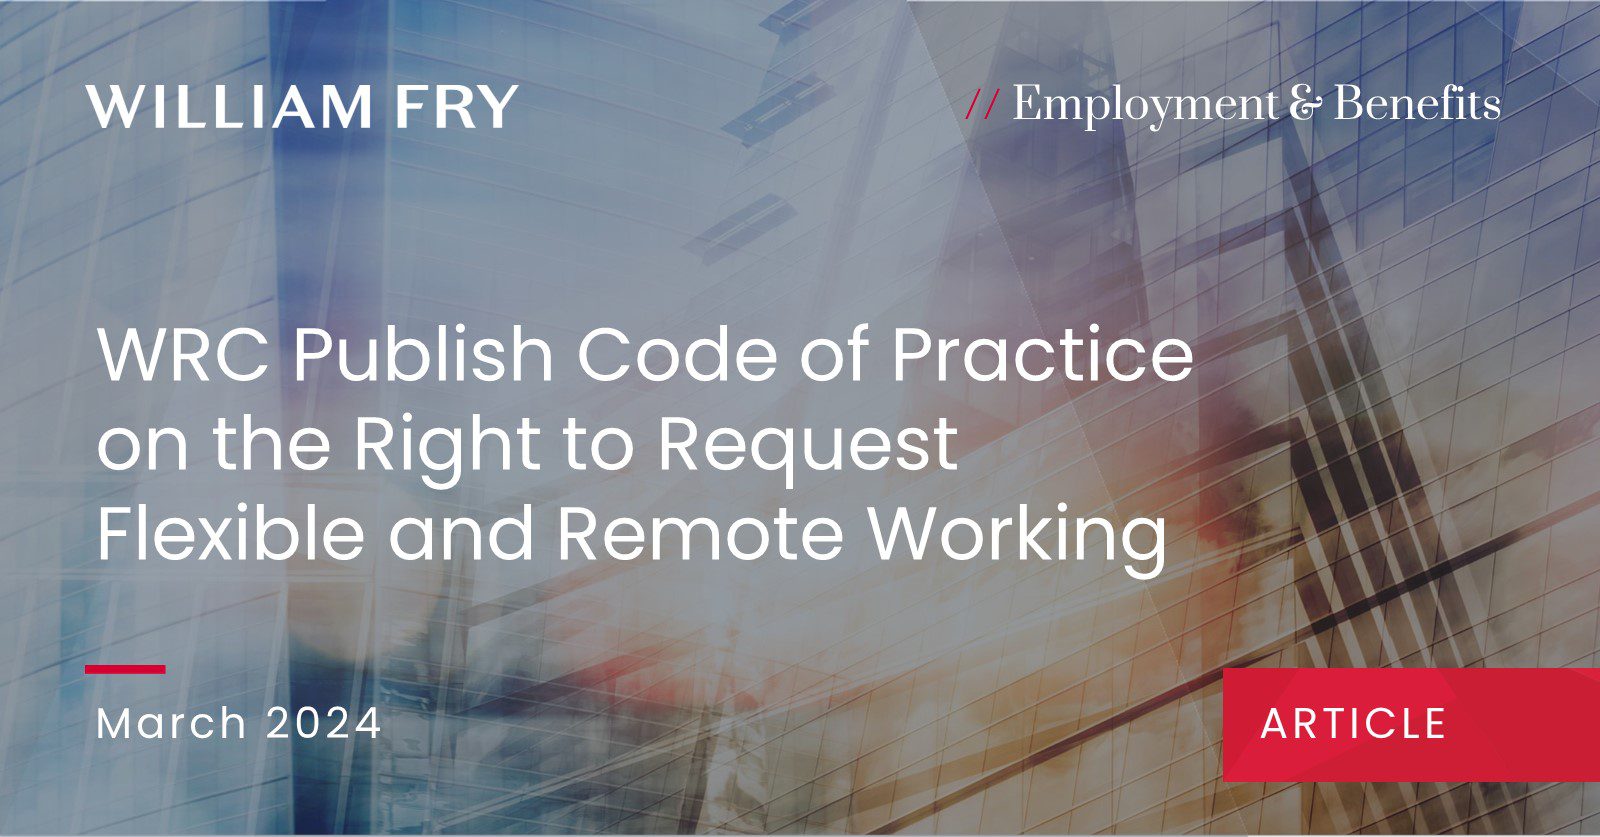 WRC Publish Code of Practice on the Right to Request Flexible and Remote Working